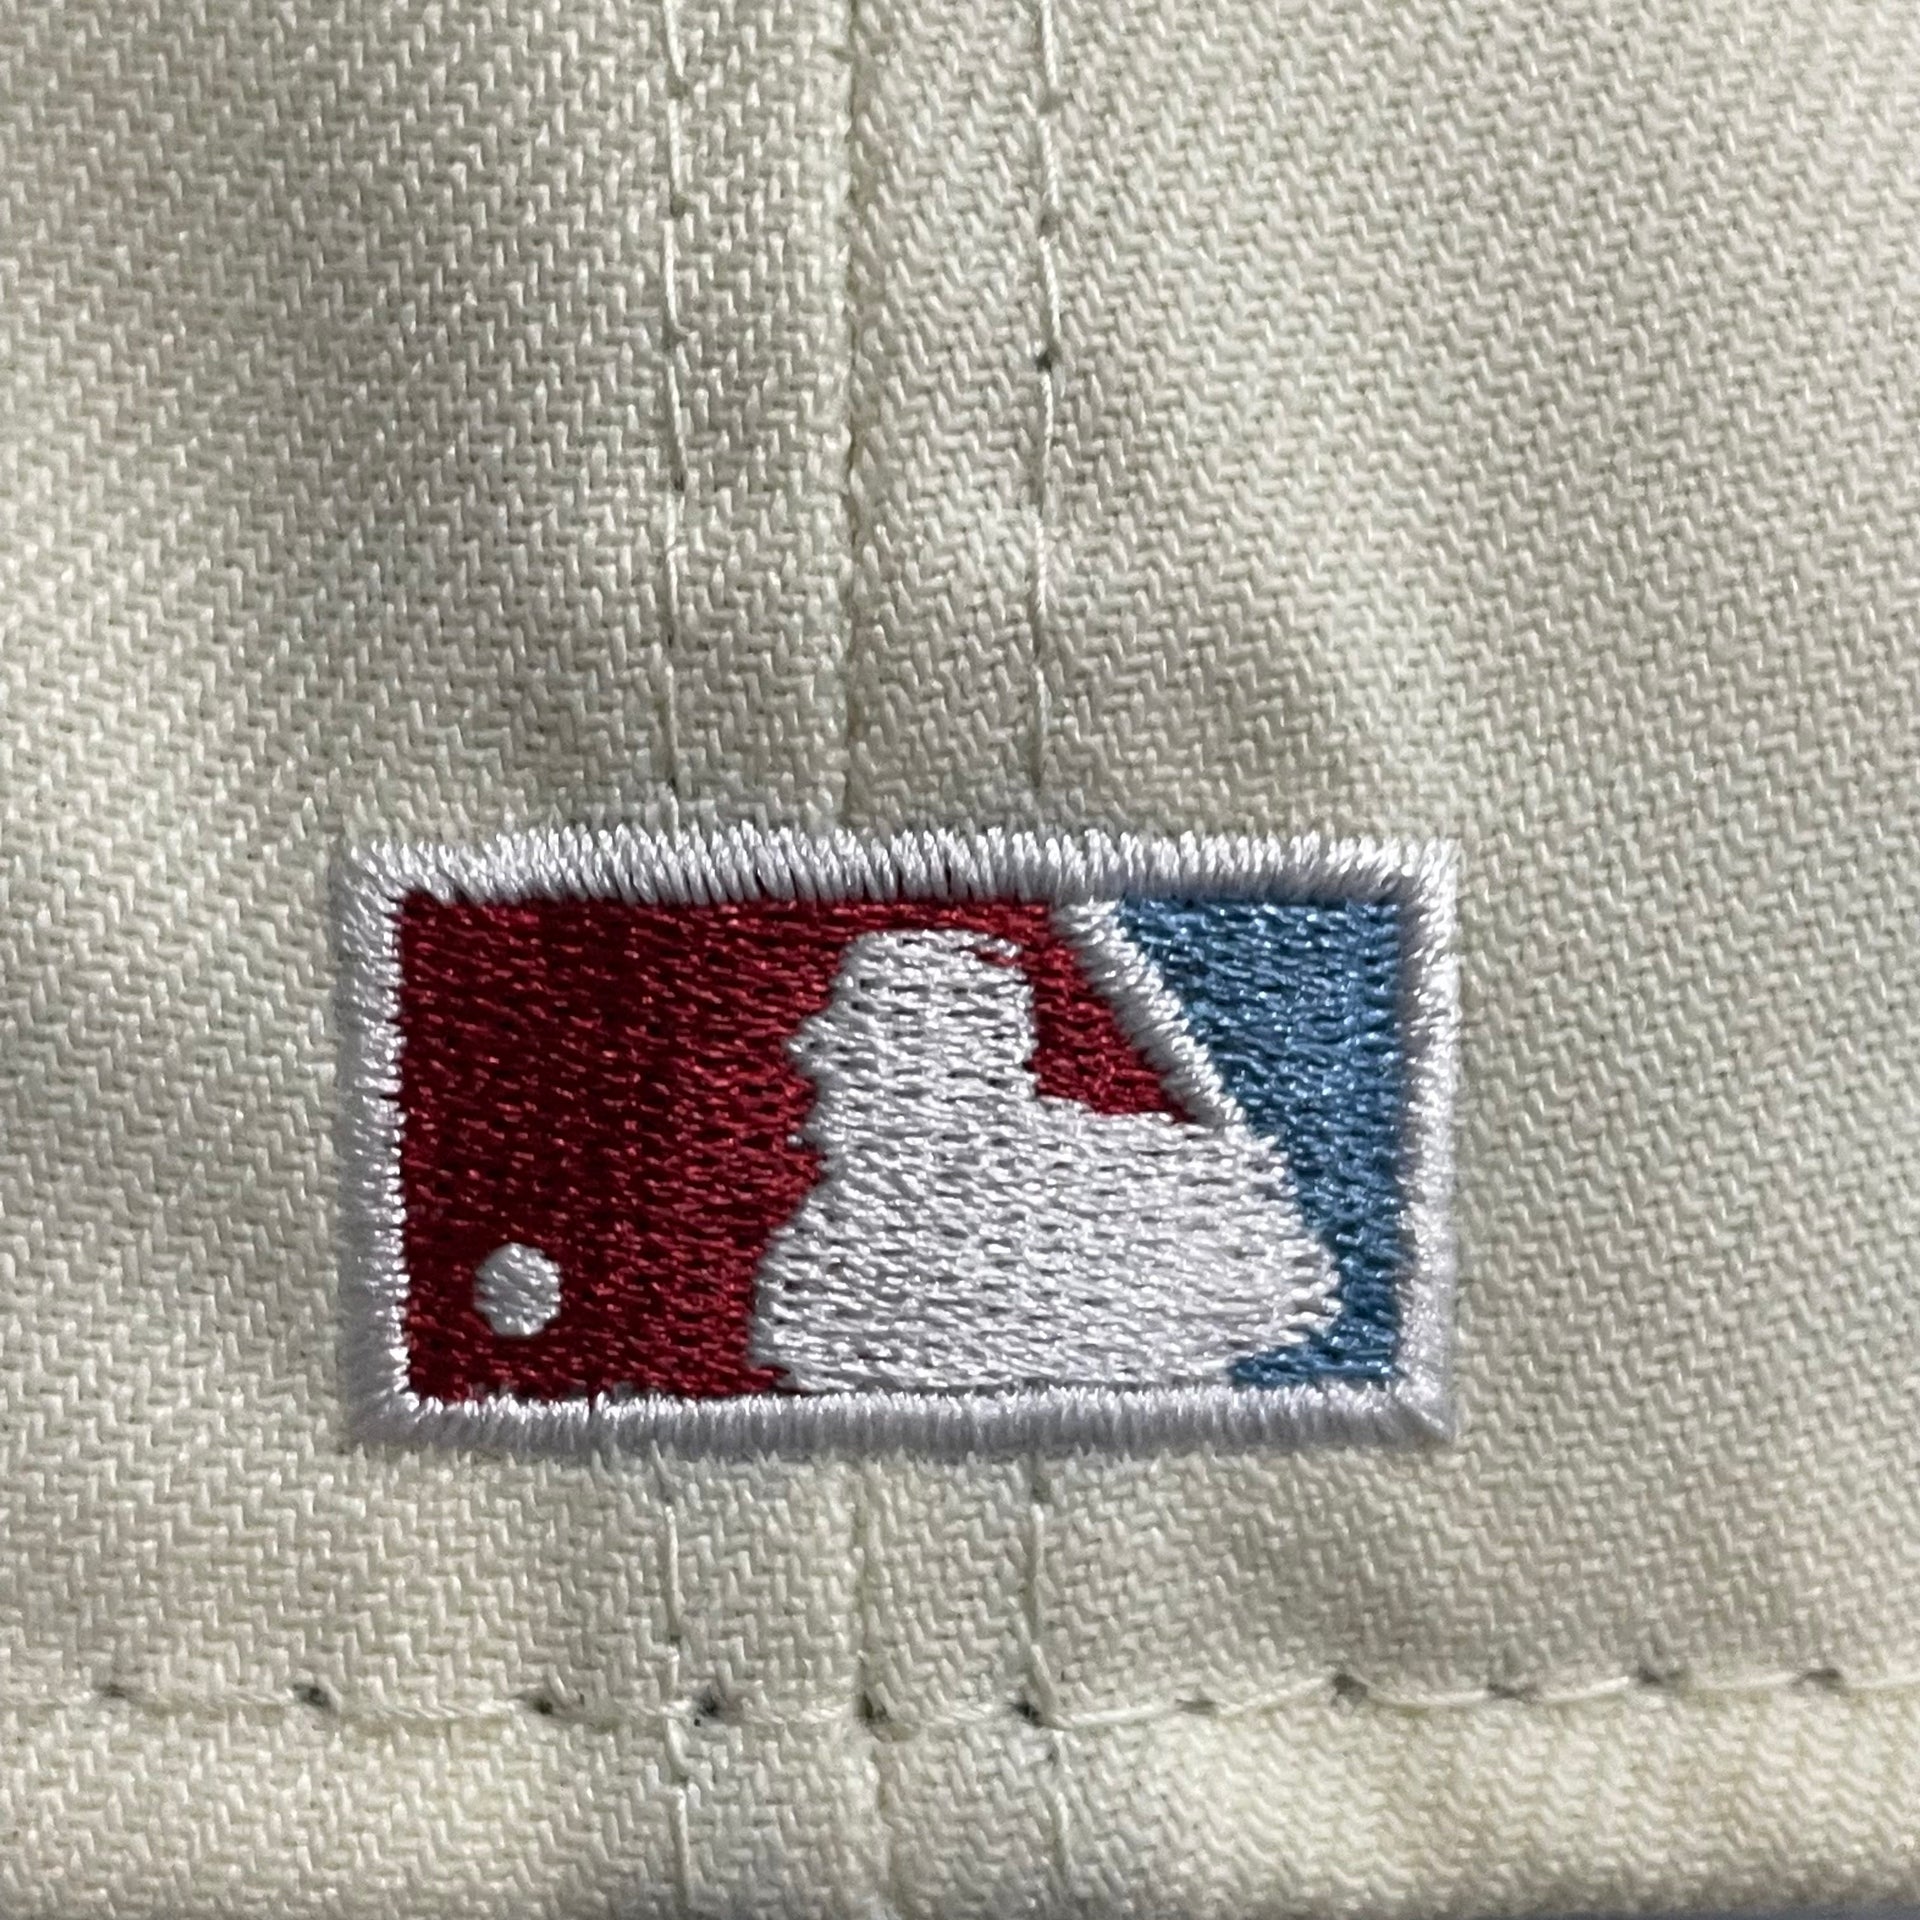 Flat Cooperstown batterman logo on the back of the Philadelphia Phillies Cooperstown City Hall Logo Veterans Stadium Side Patch Powder Blue UV 59Fifty Fitted Cap | Chrome/Maroon nohiosafariclub Exclusive